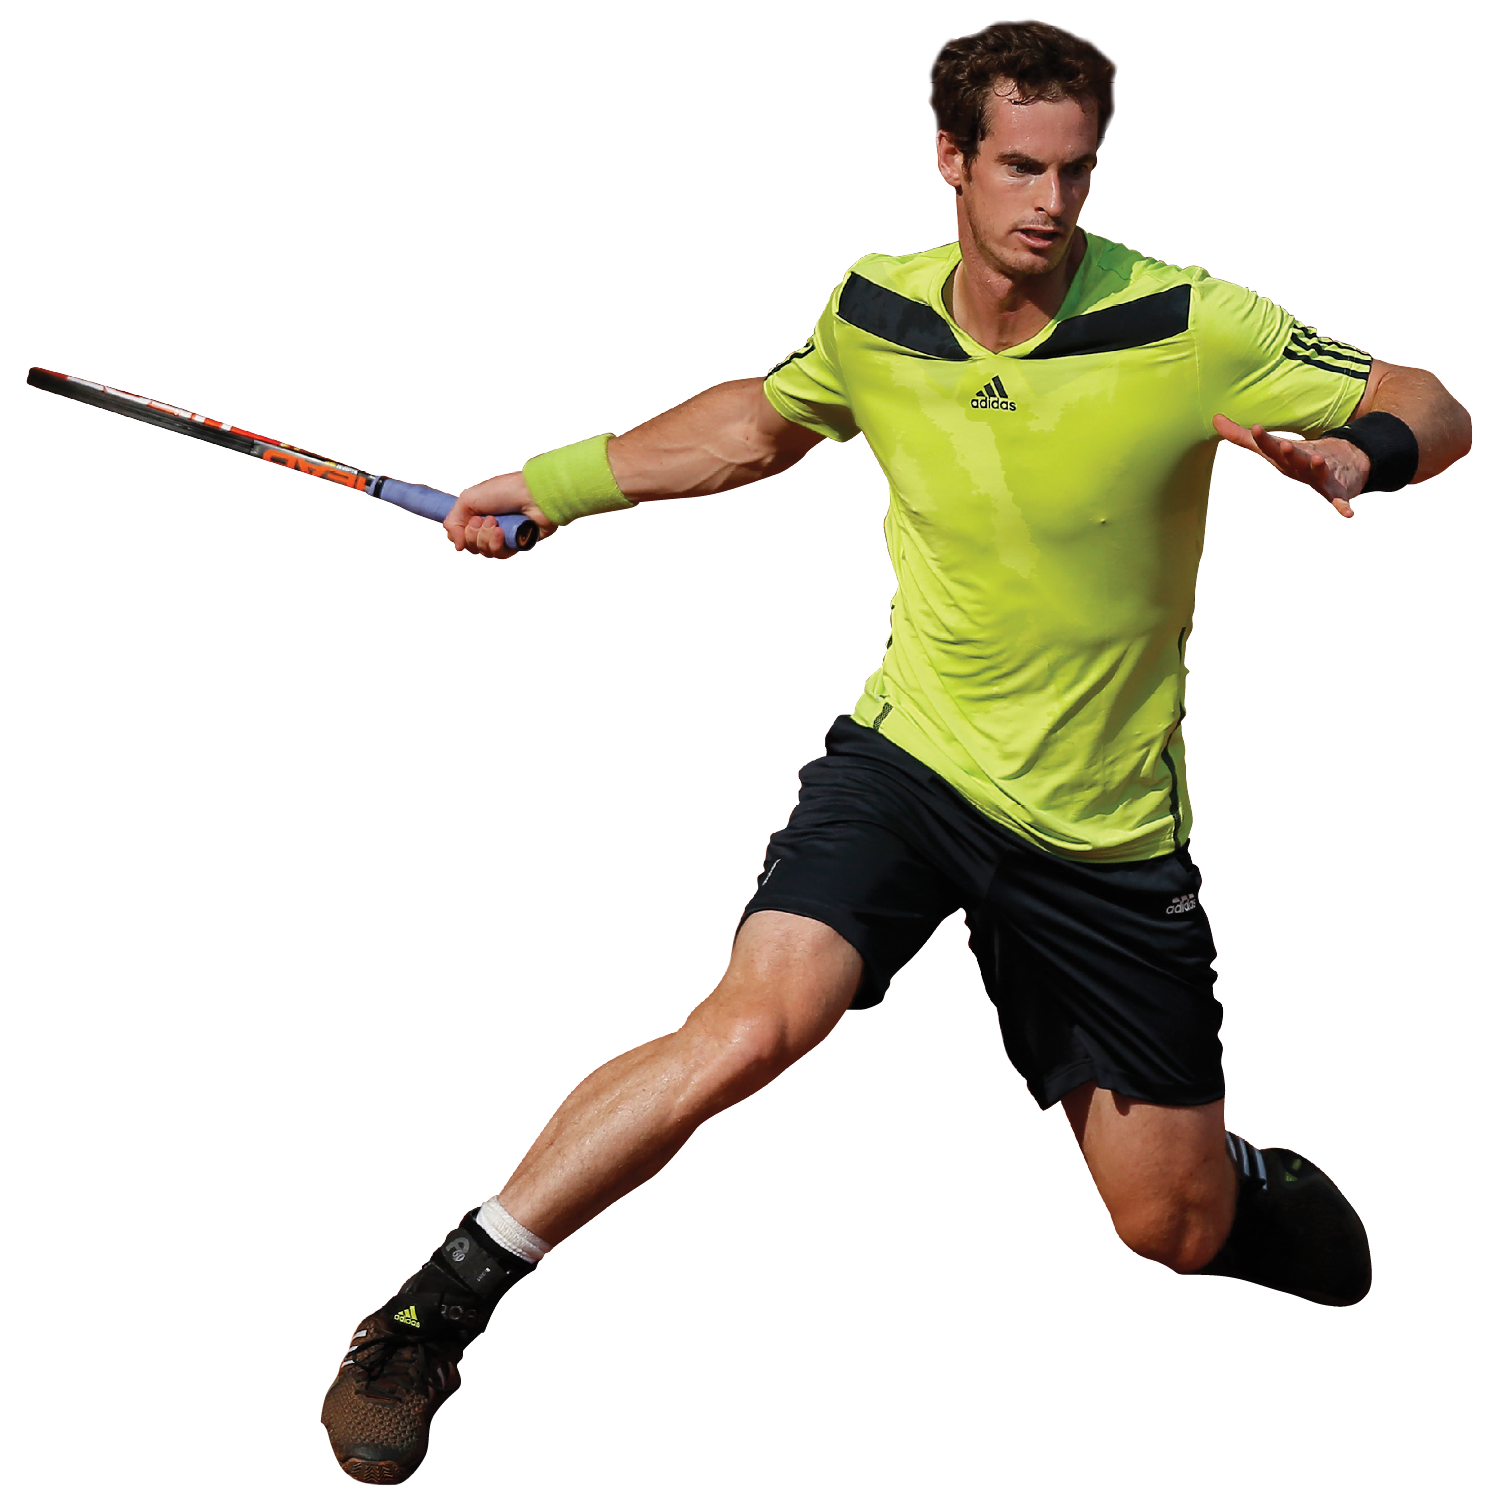 Andy Murray Transparent Image